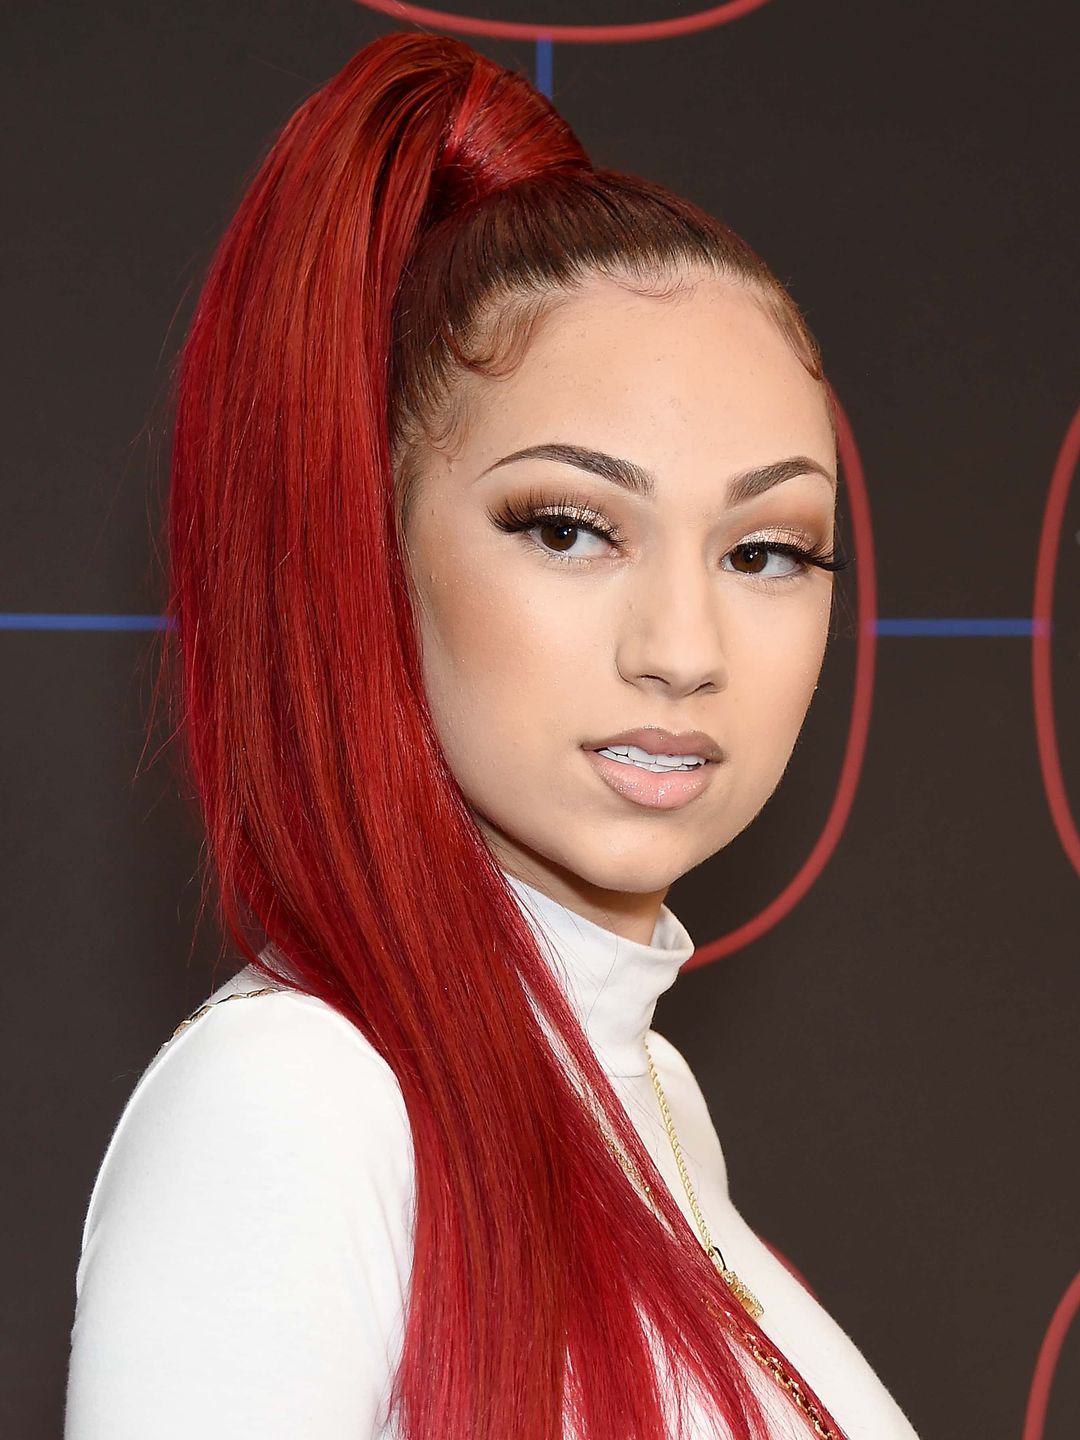 Danielle Bregoli height and weight